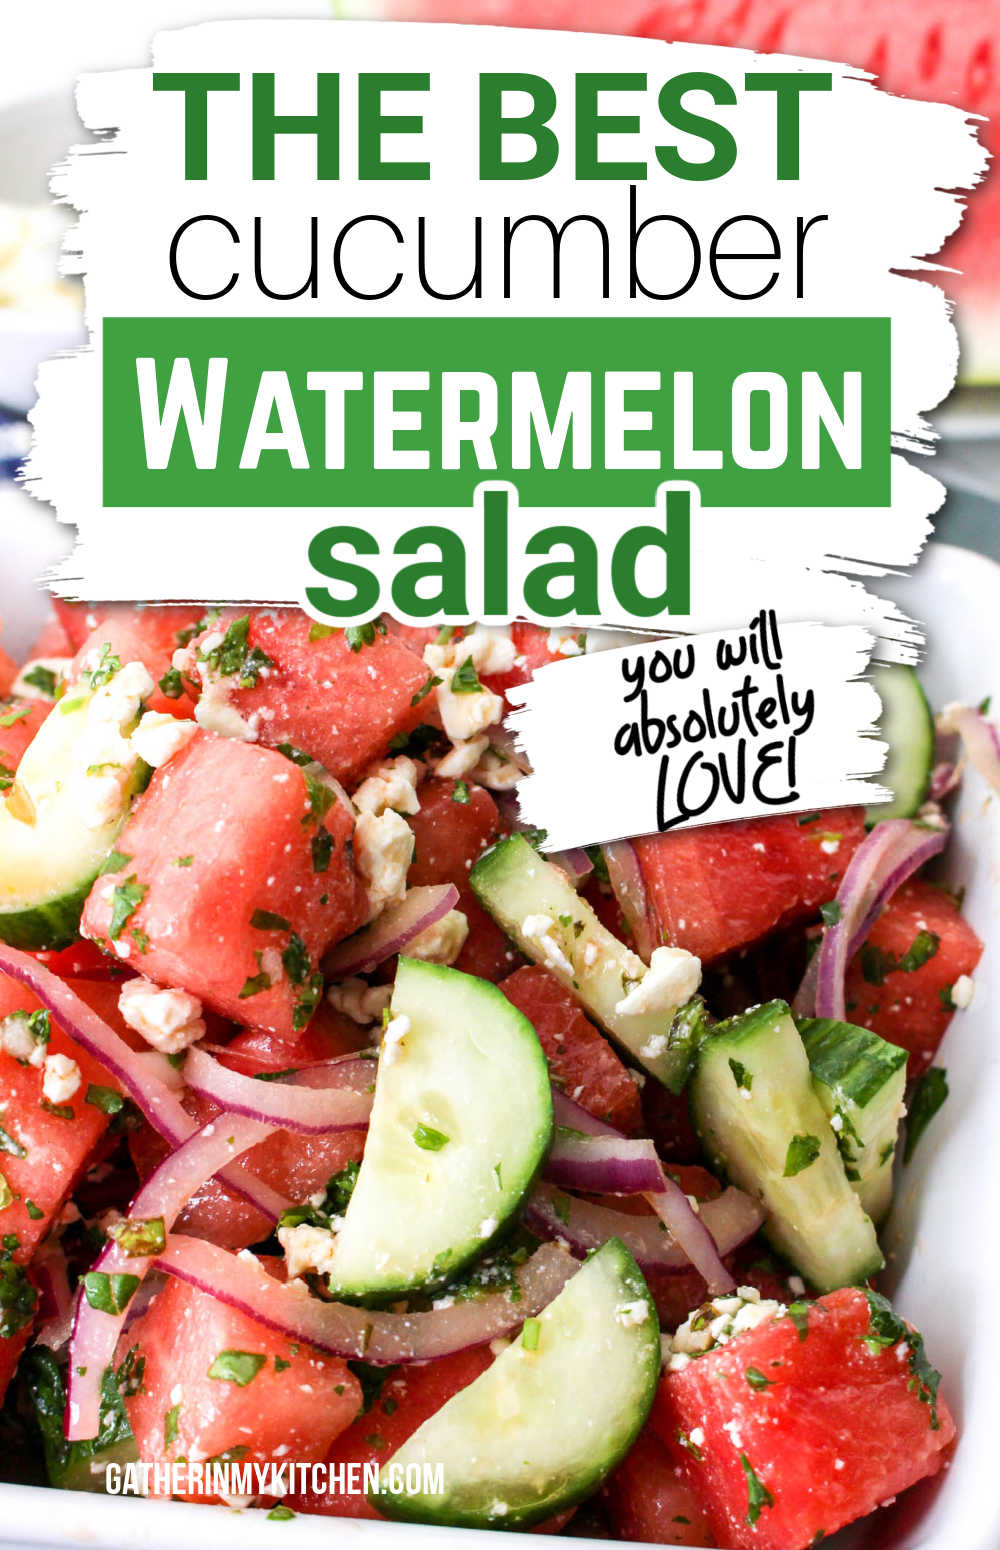 Pin image: top says "The best cucumber watermelon salad you will absolutely love" and overlaid on a closeup picture of watermelon salad.